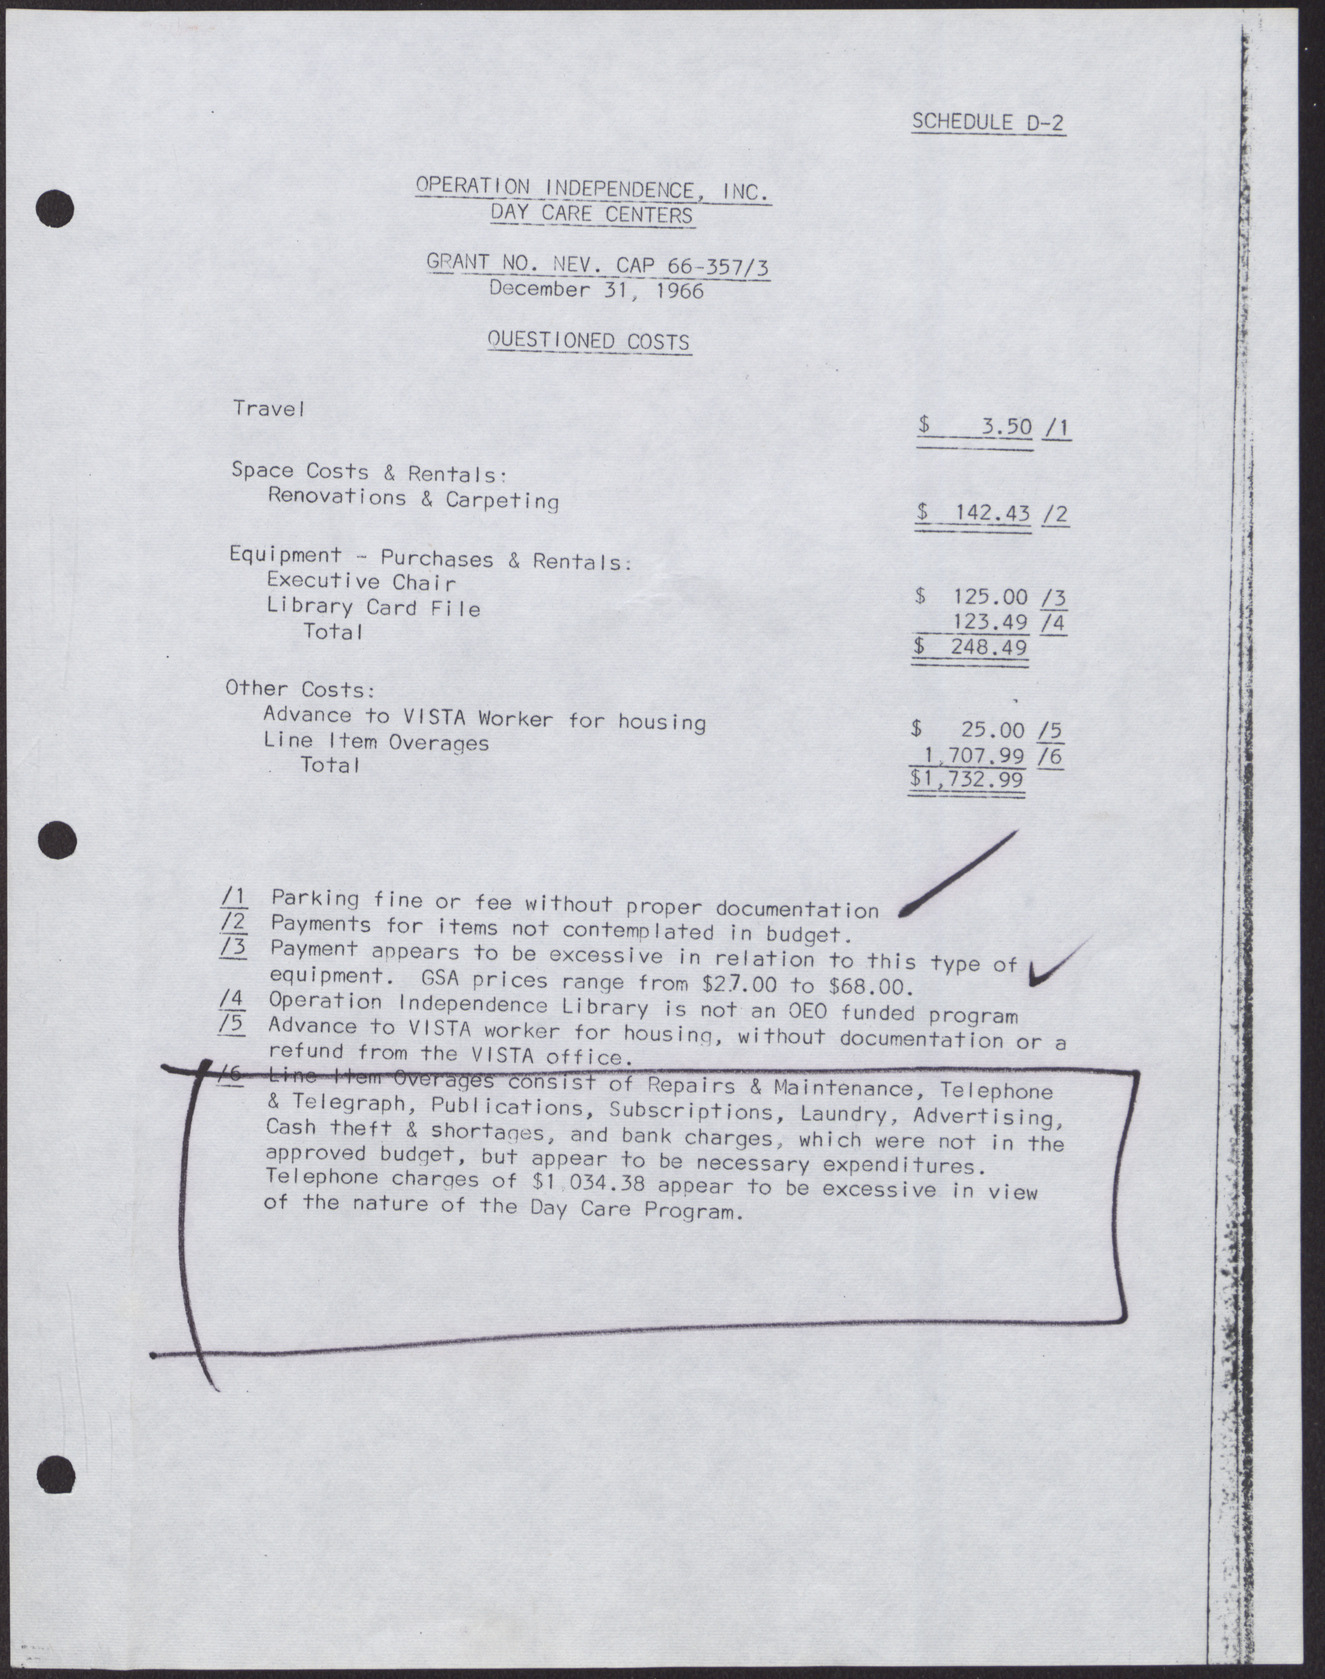 Operation Independence, Inc. Day Care Centers Questioned Costs, December 31, 1966, page 2